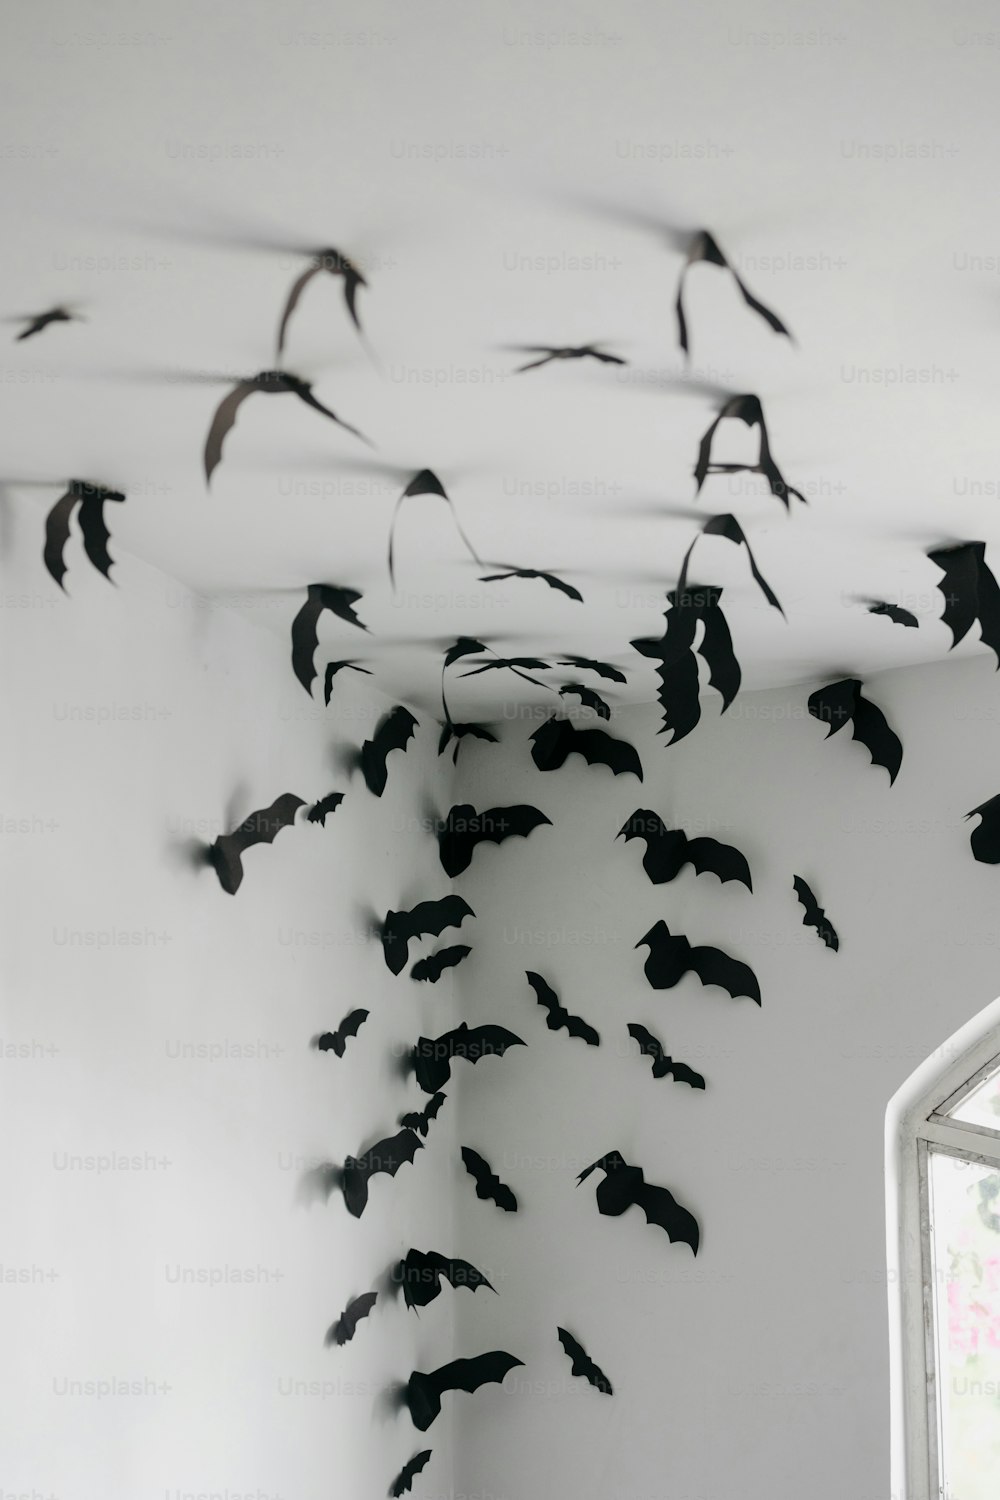 a flock of bats flying in the air